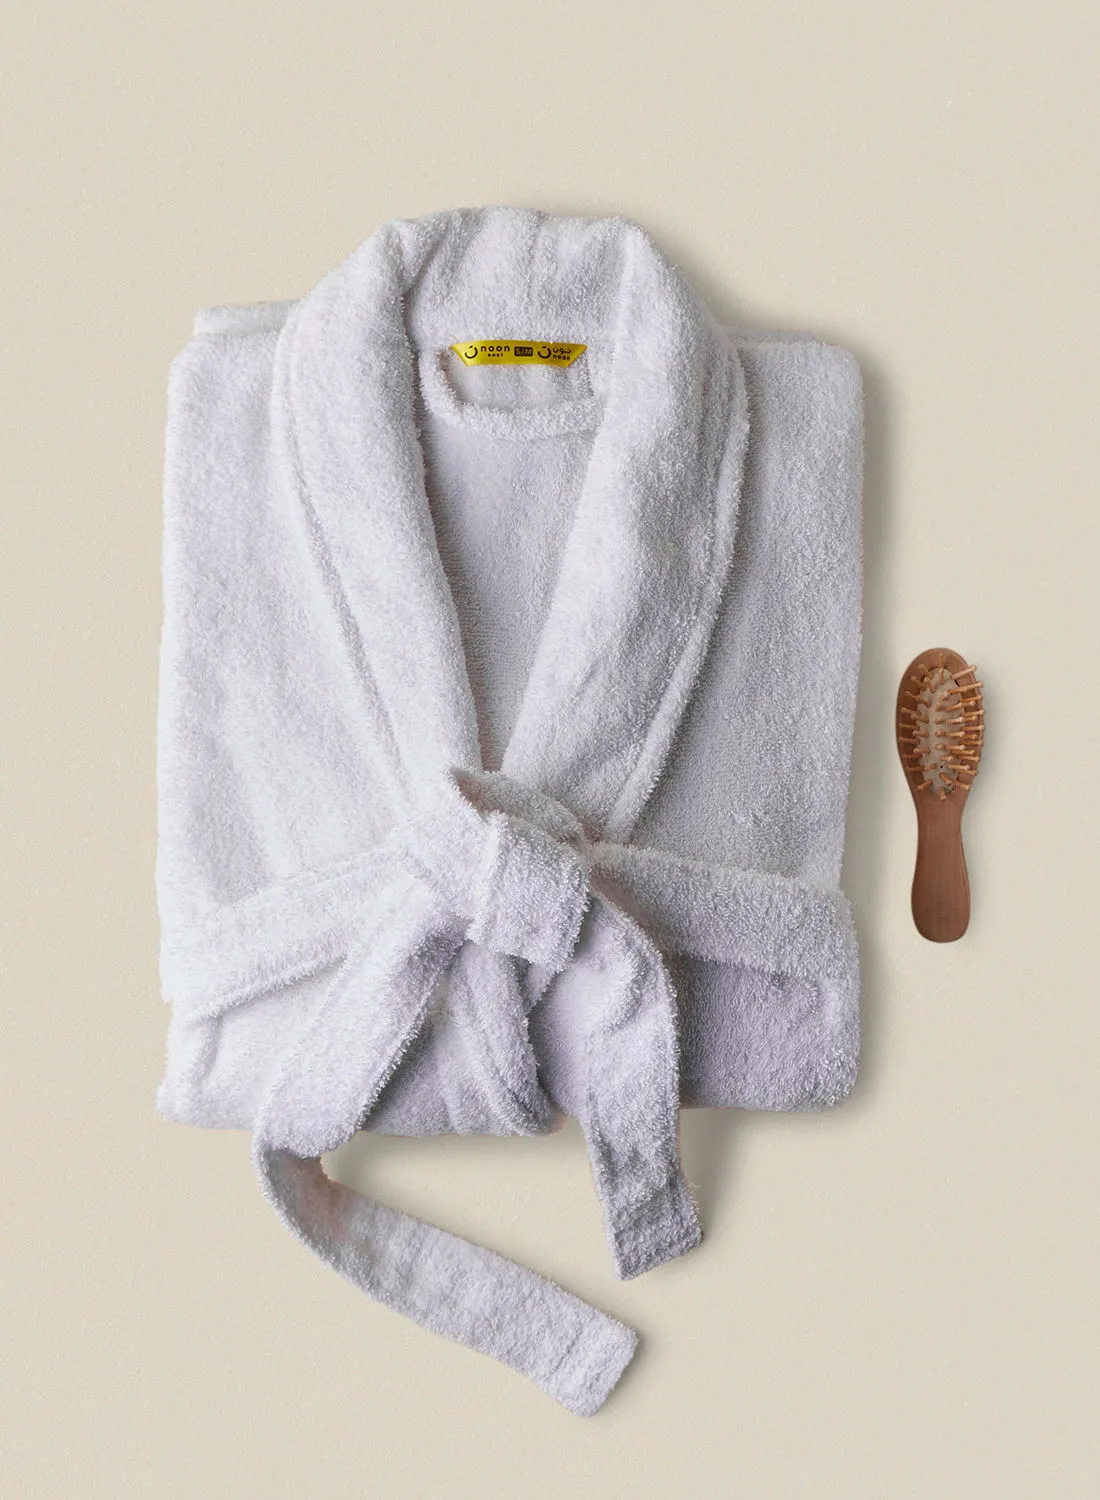 noon east Bathrobe - 380 GSM 100% Cotton Terry Silky Soft Spa Quality Comfort - Shawl Collar & Pocket - White Color - 1 Piece